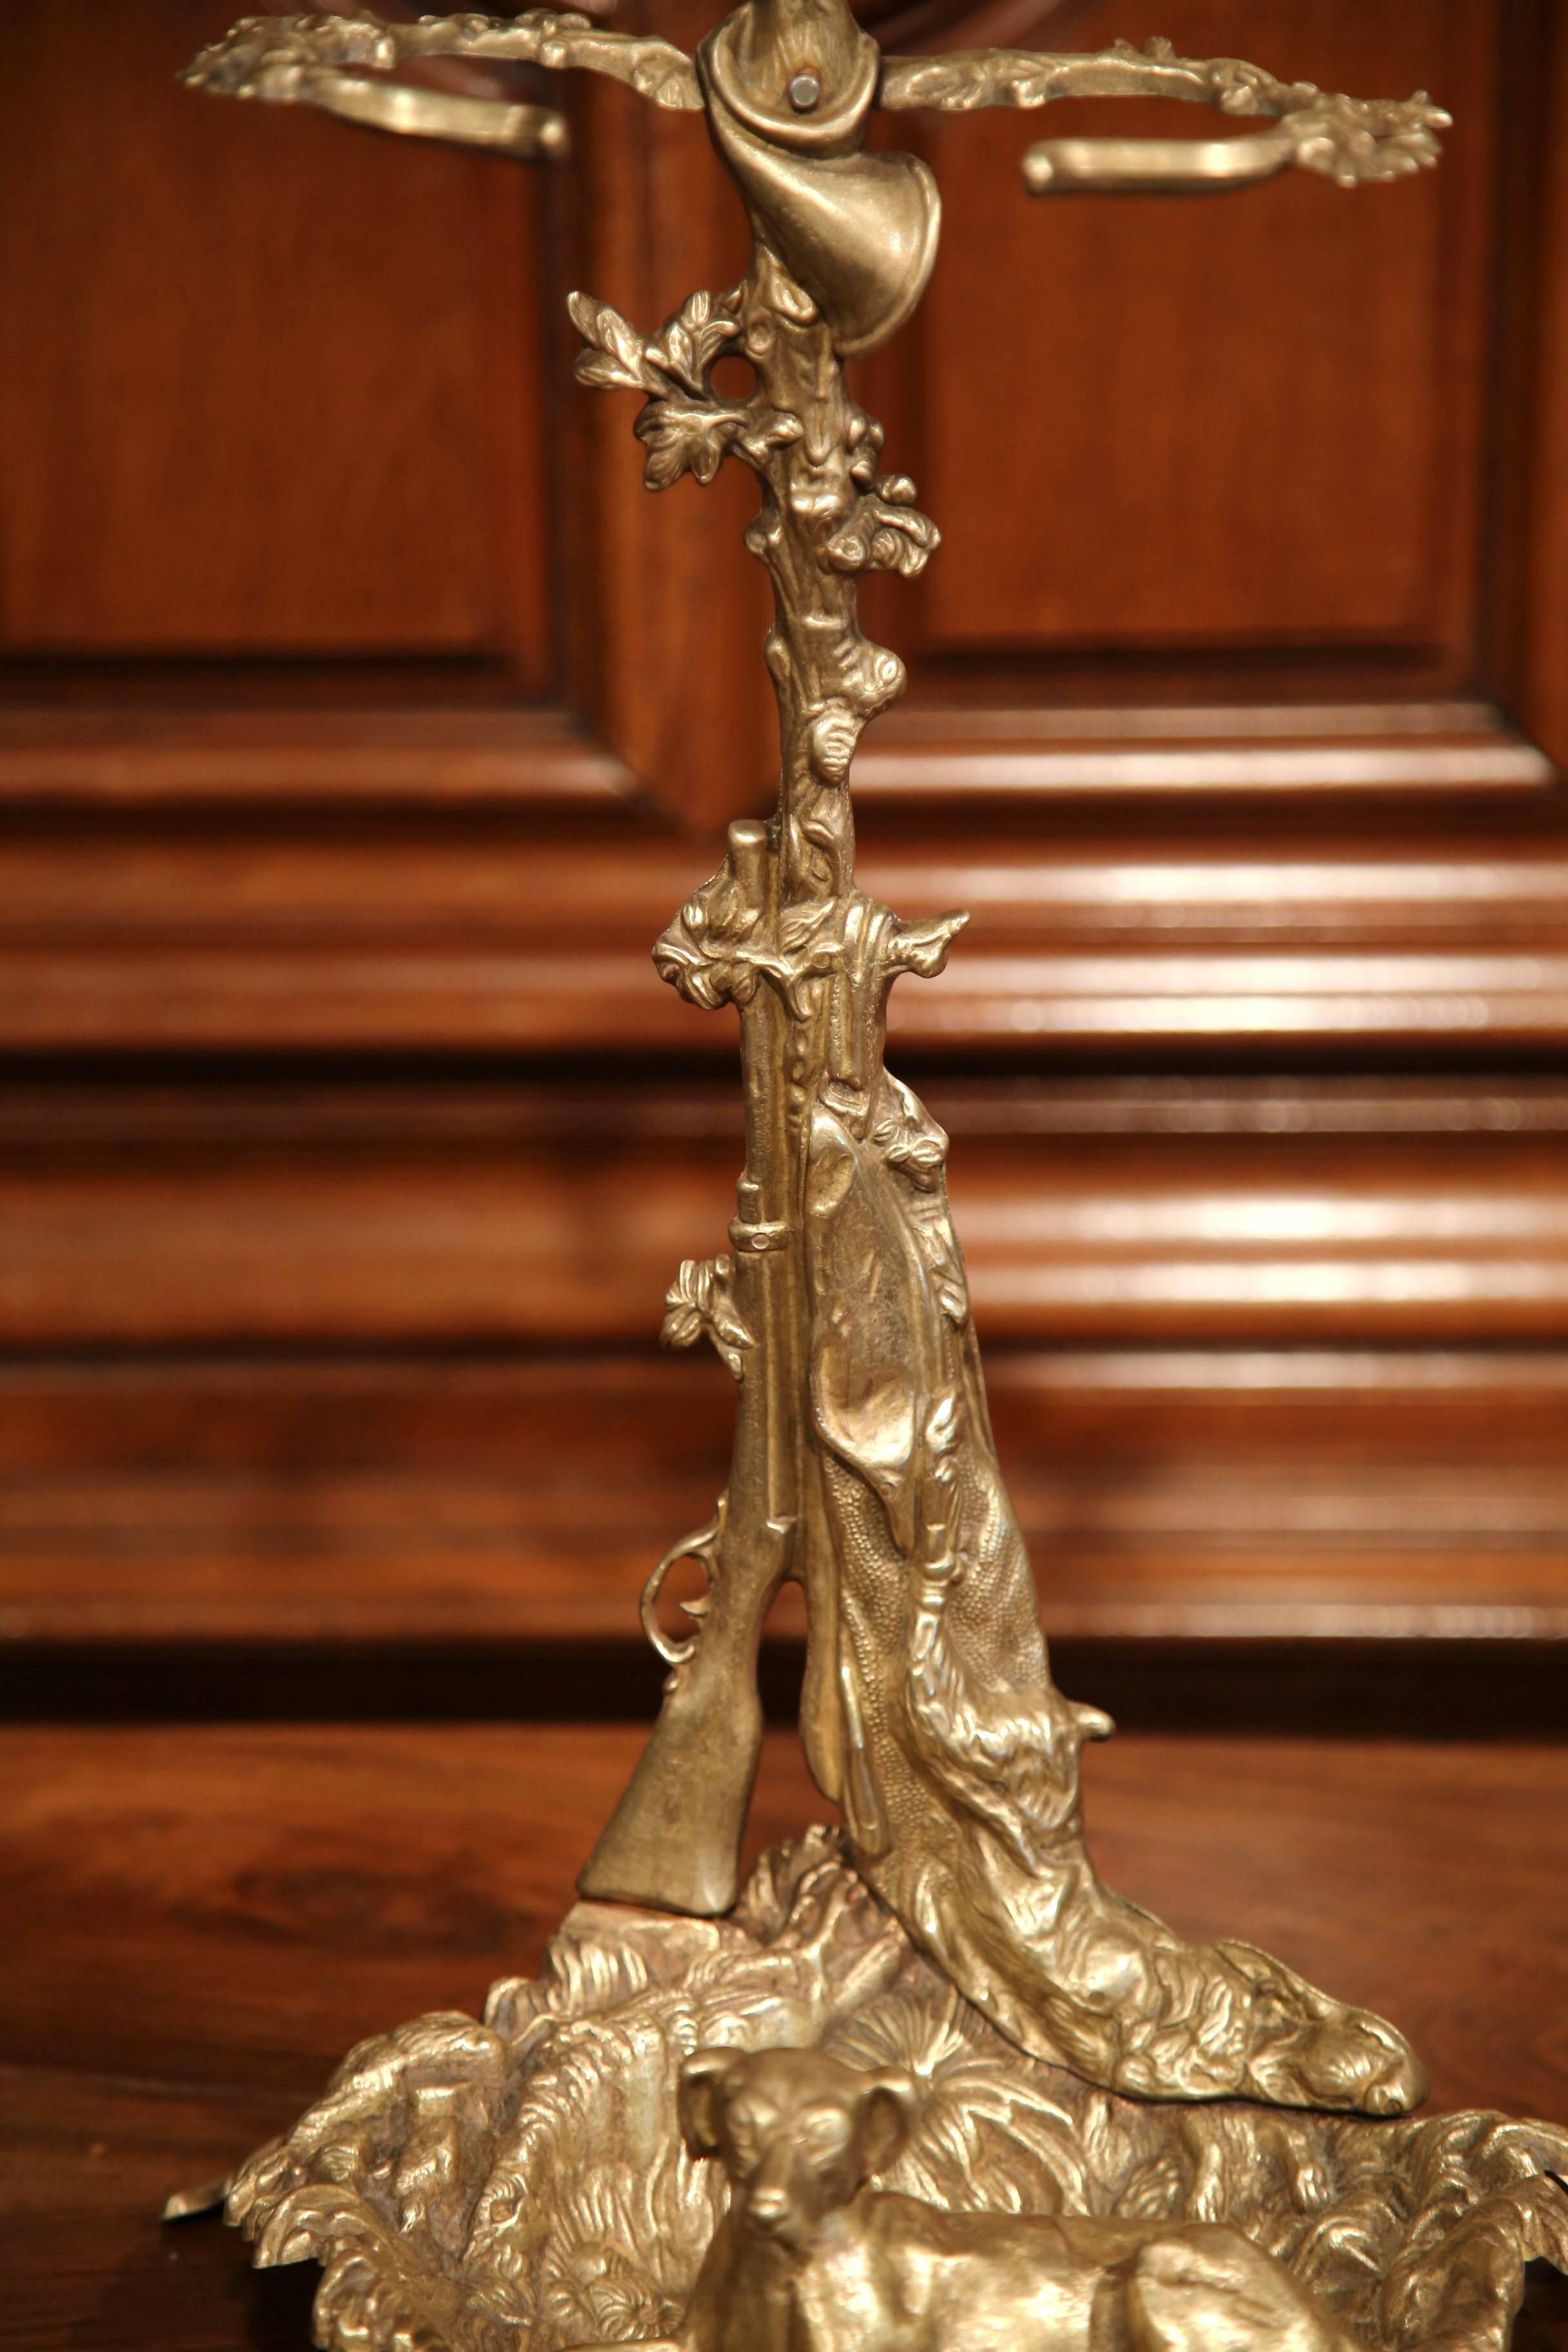 This fine antique umbrella or cane stand was crafted in France, circa 1870. The freestanding brass piece features a hunting theme that includes a gun, a rabbit, a horn and a dog motifs. The stand sits on four small feet shaped as leaves. The piece